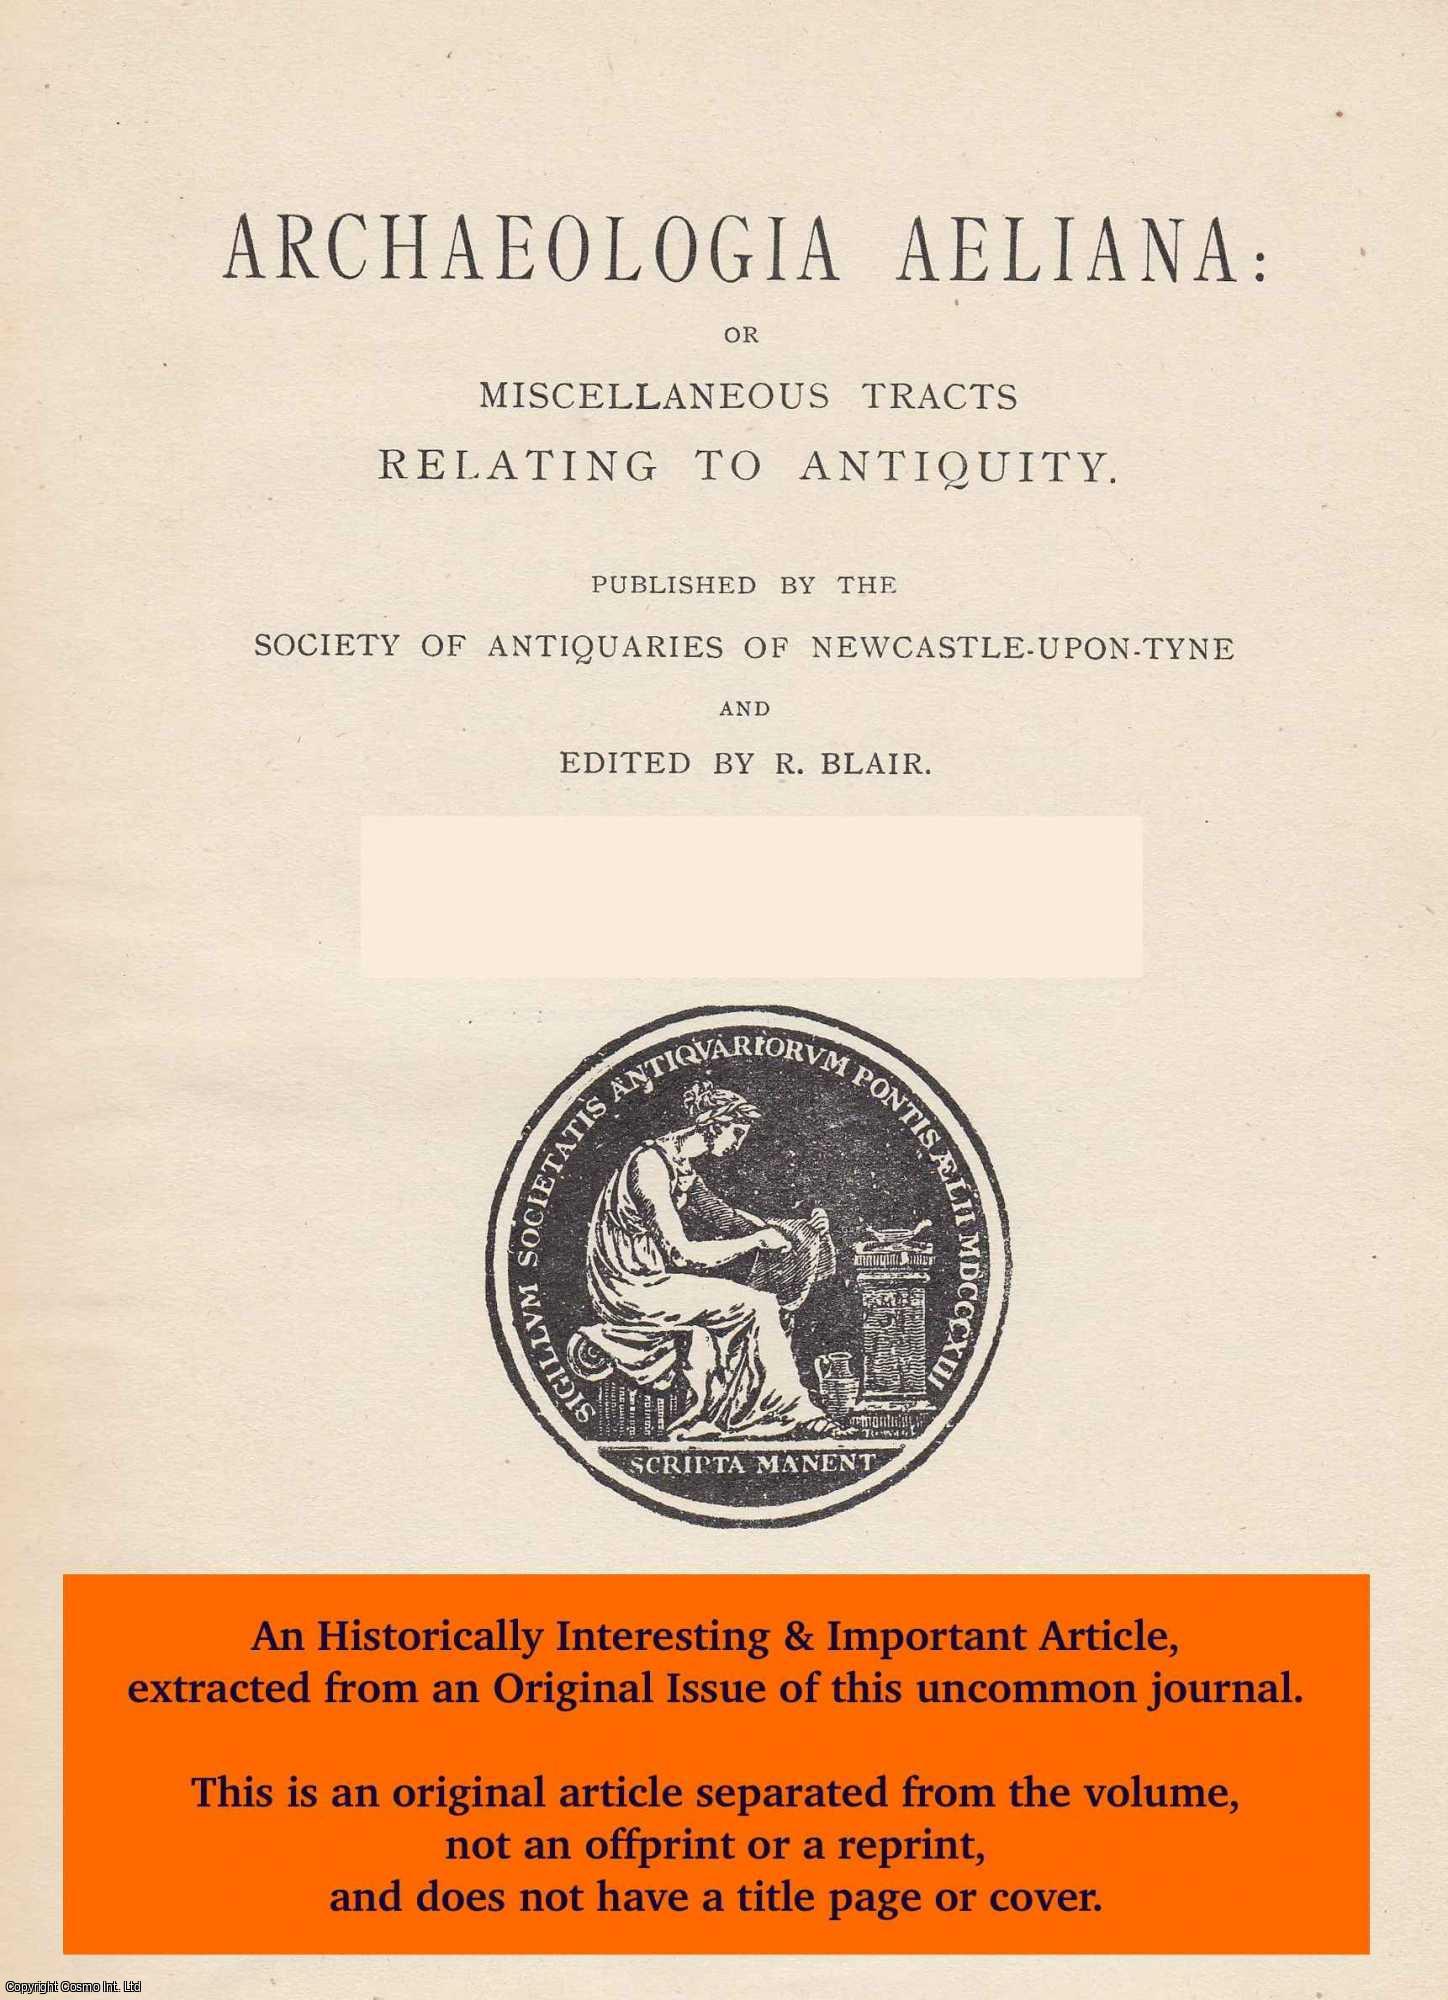 John Rogan, John - Christopher Hunter: Antiquary. An original article from The Archaeologia Aeliana: or Miscellaneous Tracts Relating to Antiquity, 1954.